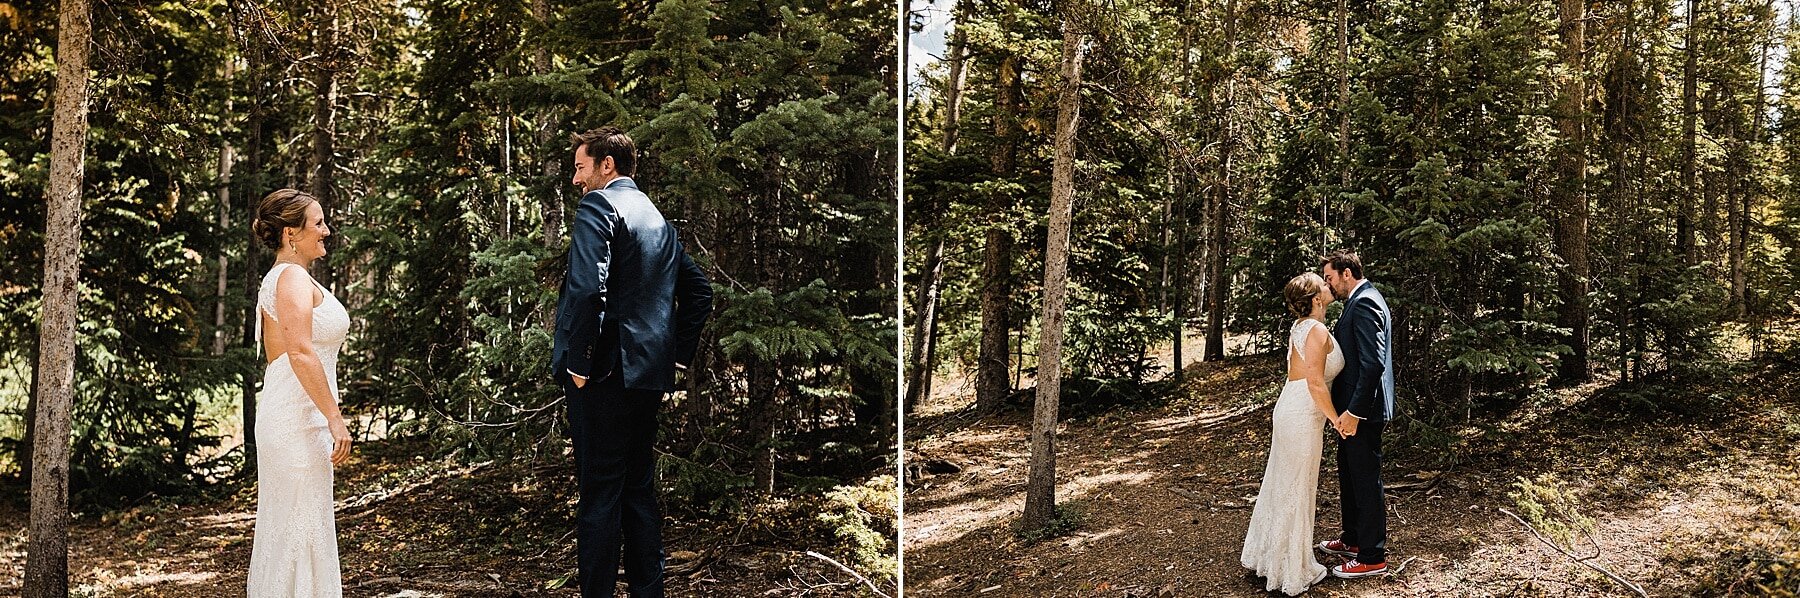 Colorado Mountain Elopement in the Fall | Vow of the Wild